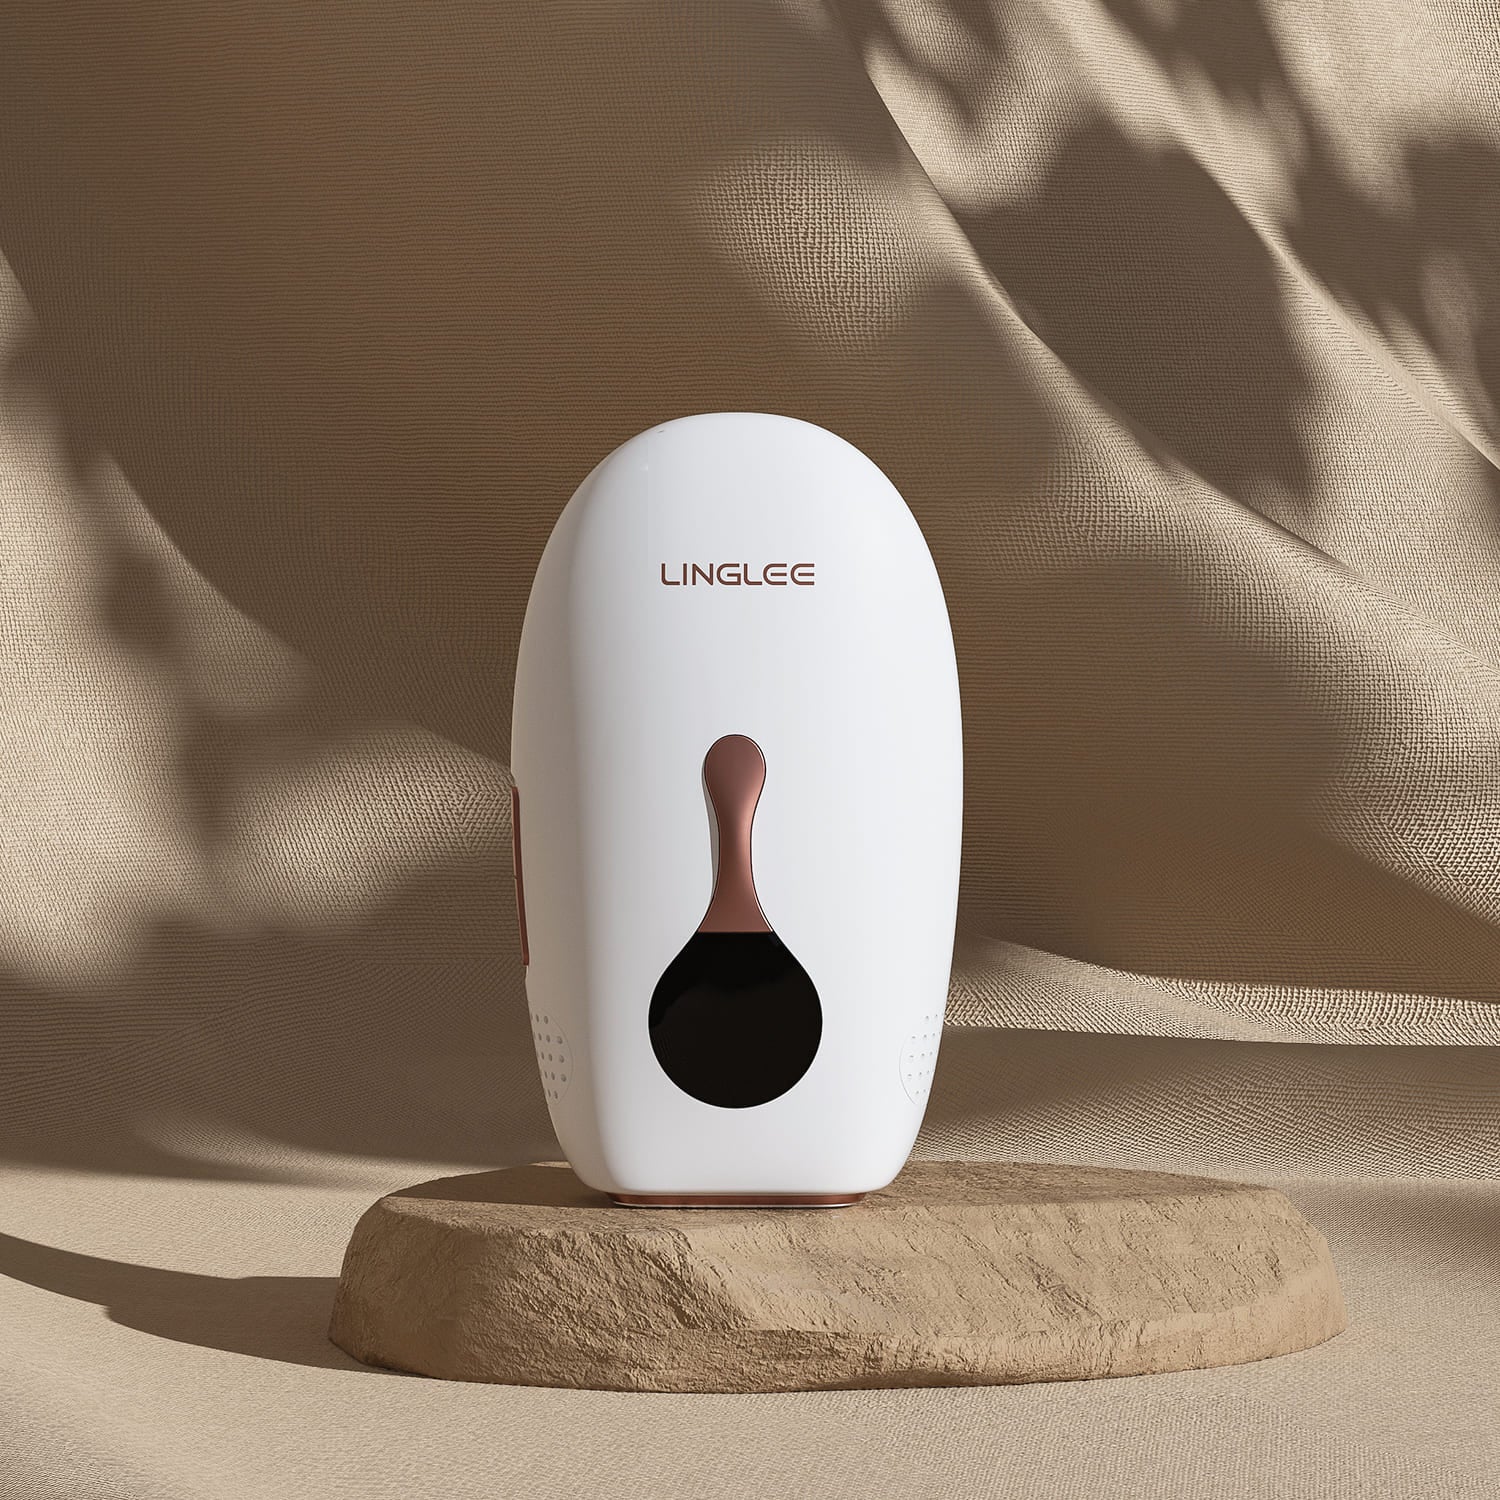 Linglee U8 IPL Hair Removal Device with ICE Cooling for Sensitive Skin - FDA-Approved Safe, Effective, and Painless Hair Removal - Remove Hair on Face, Legs, Armpit, and Bikini Line 